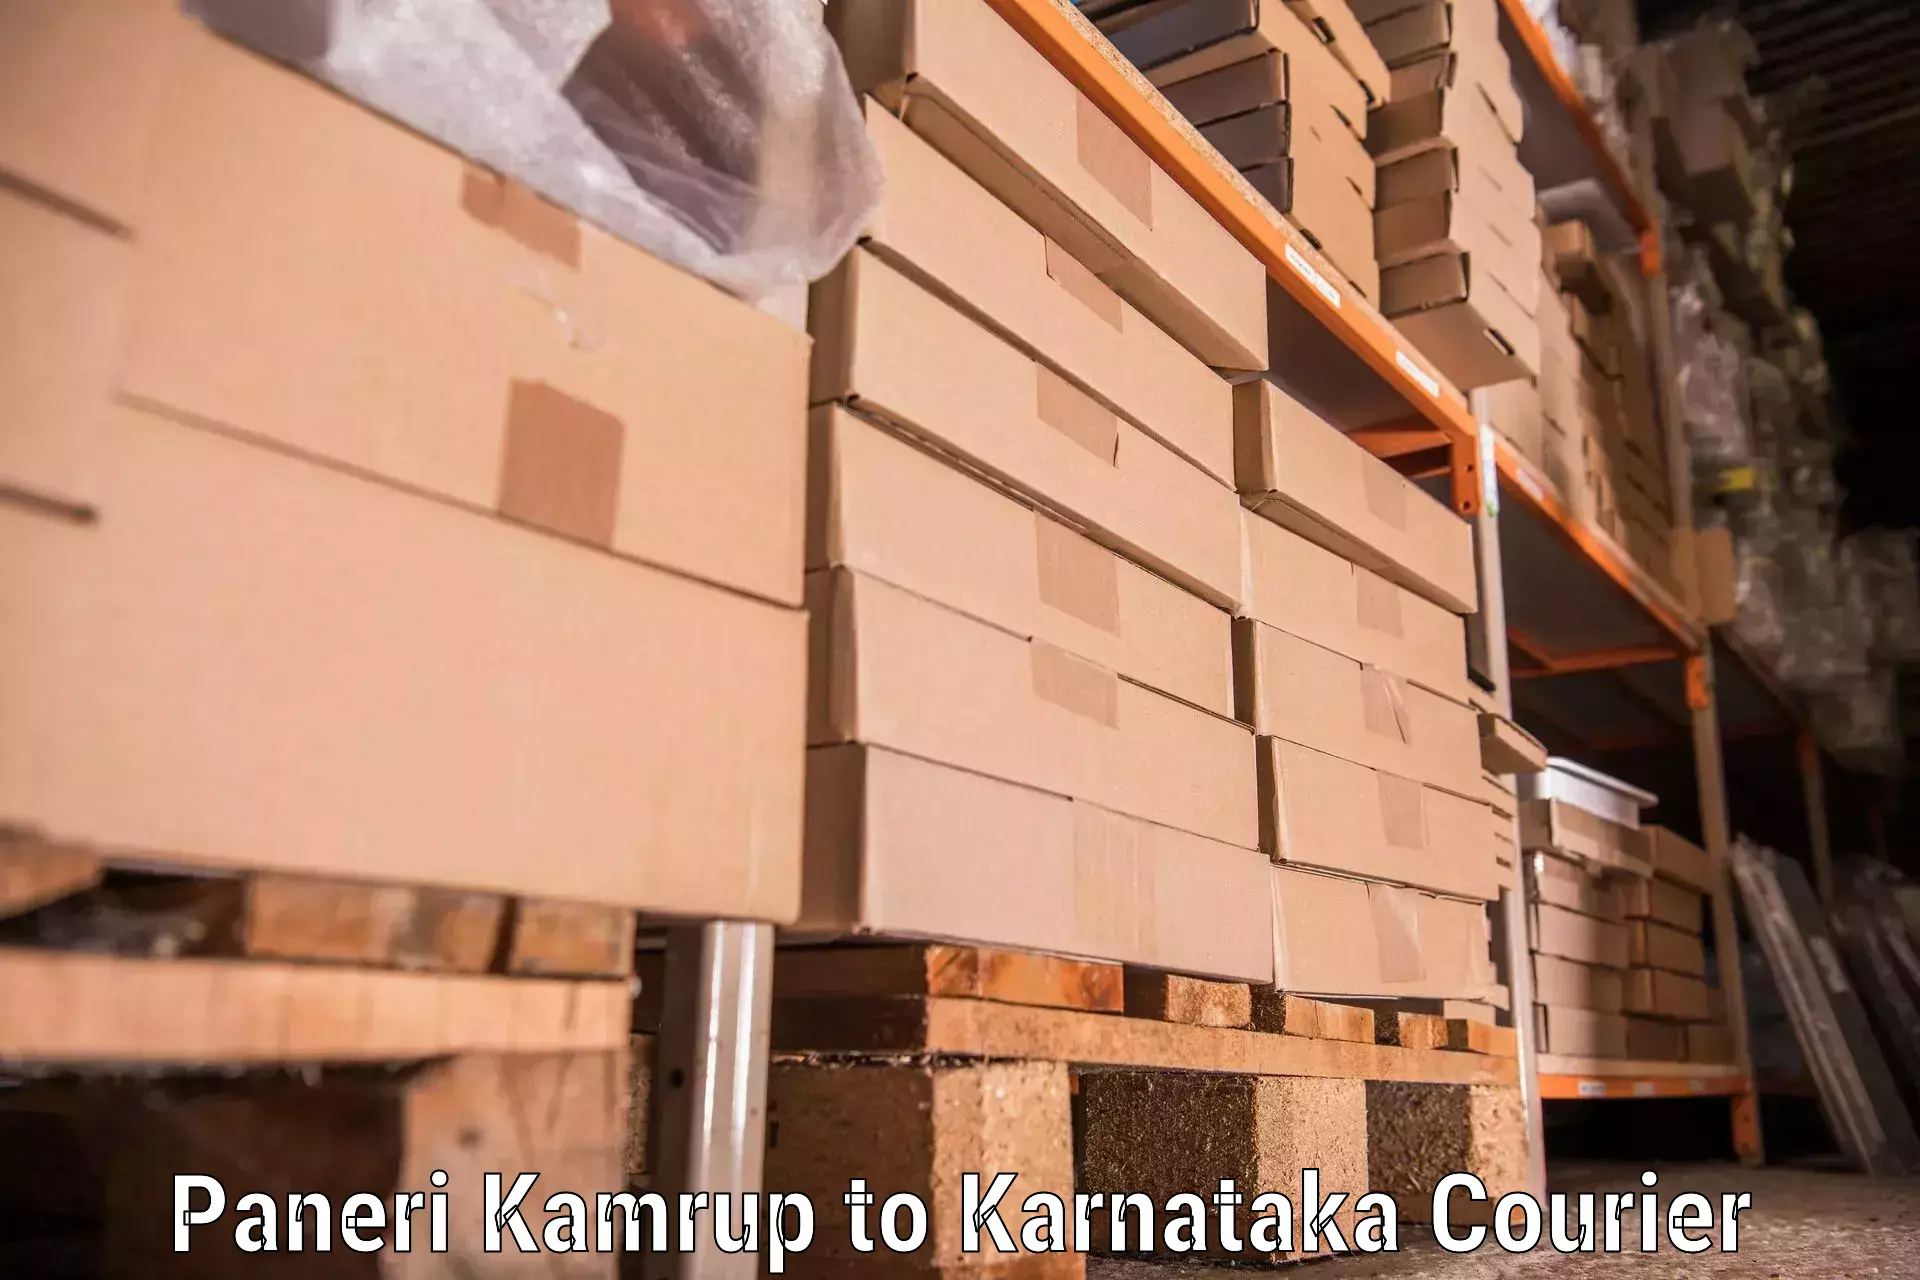 Residential moving experts Paneri Kamrup to Mysore